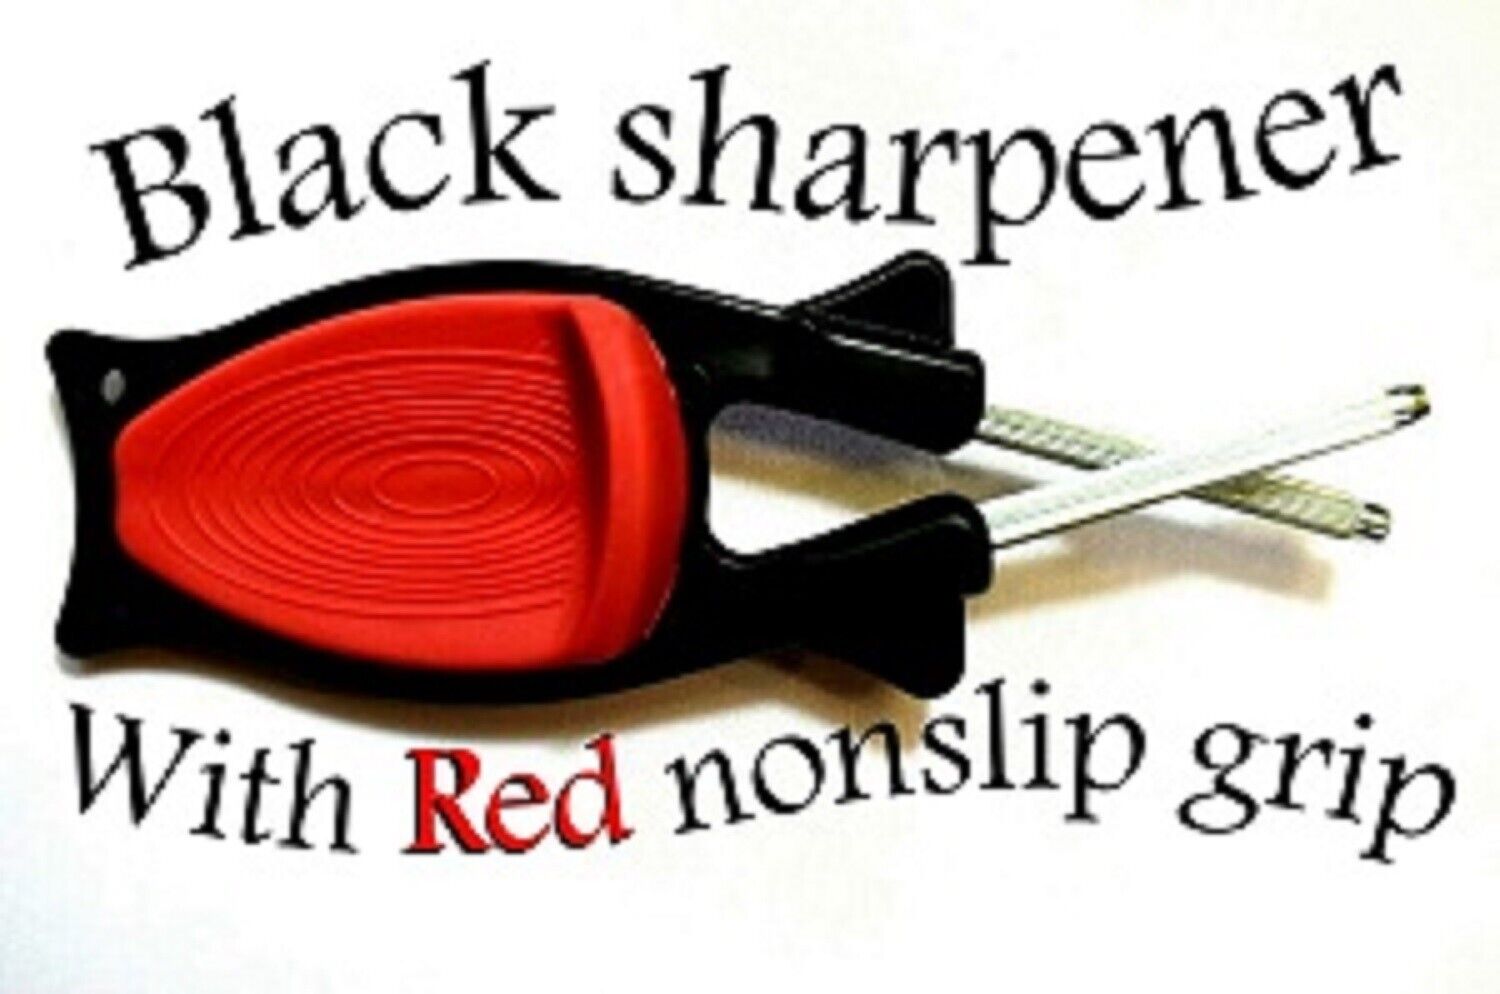 New patent American made  Block Knife sharpener for sale under 25 dollars.